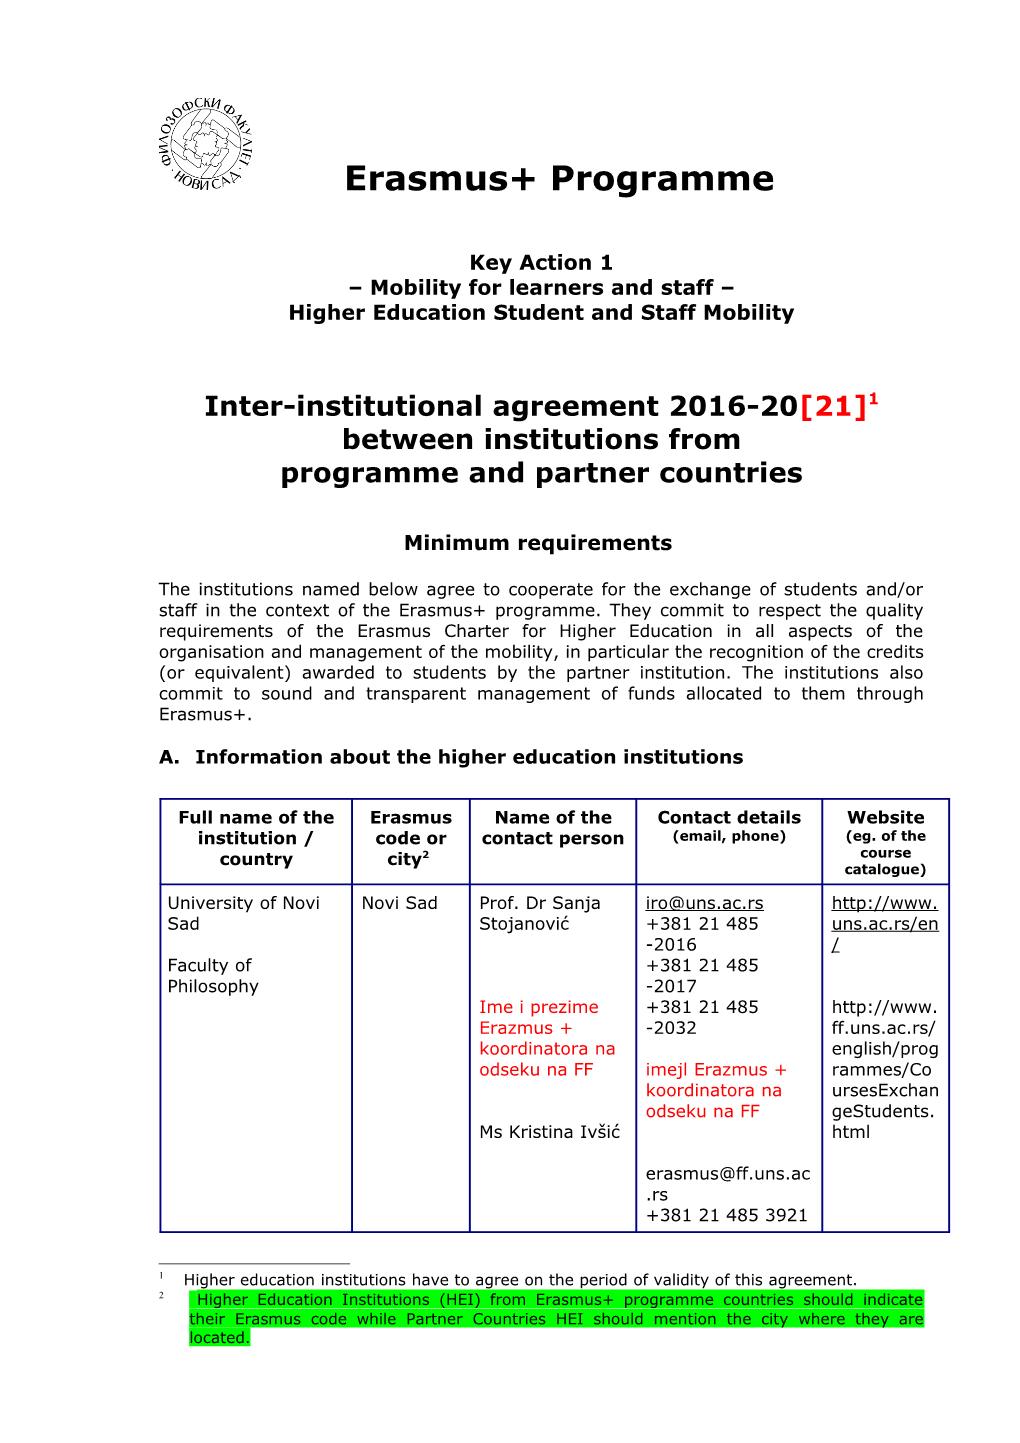 Inter-Institutional Agreement 2014-20 21 Between Institutions from Programme and Partner